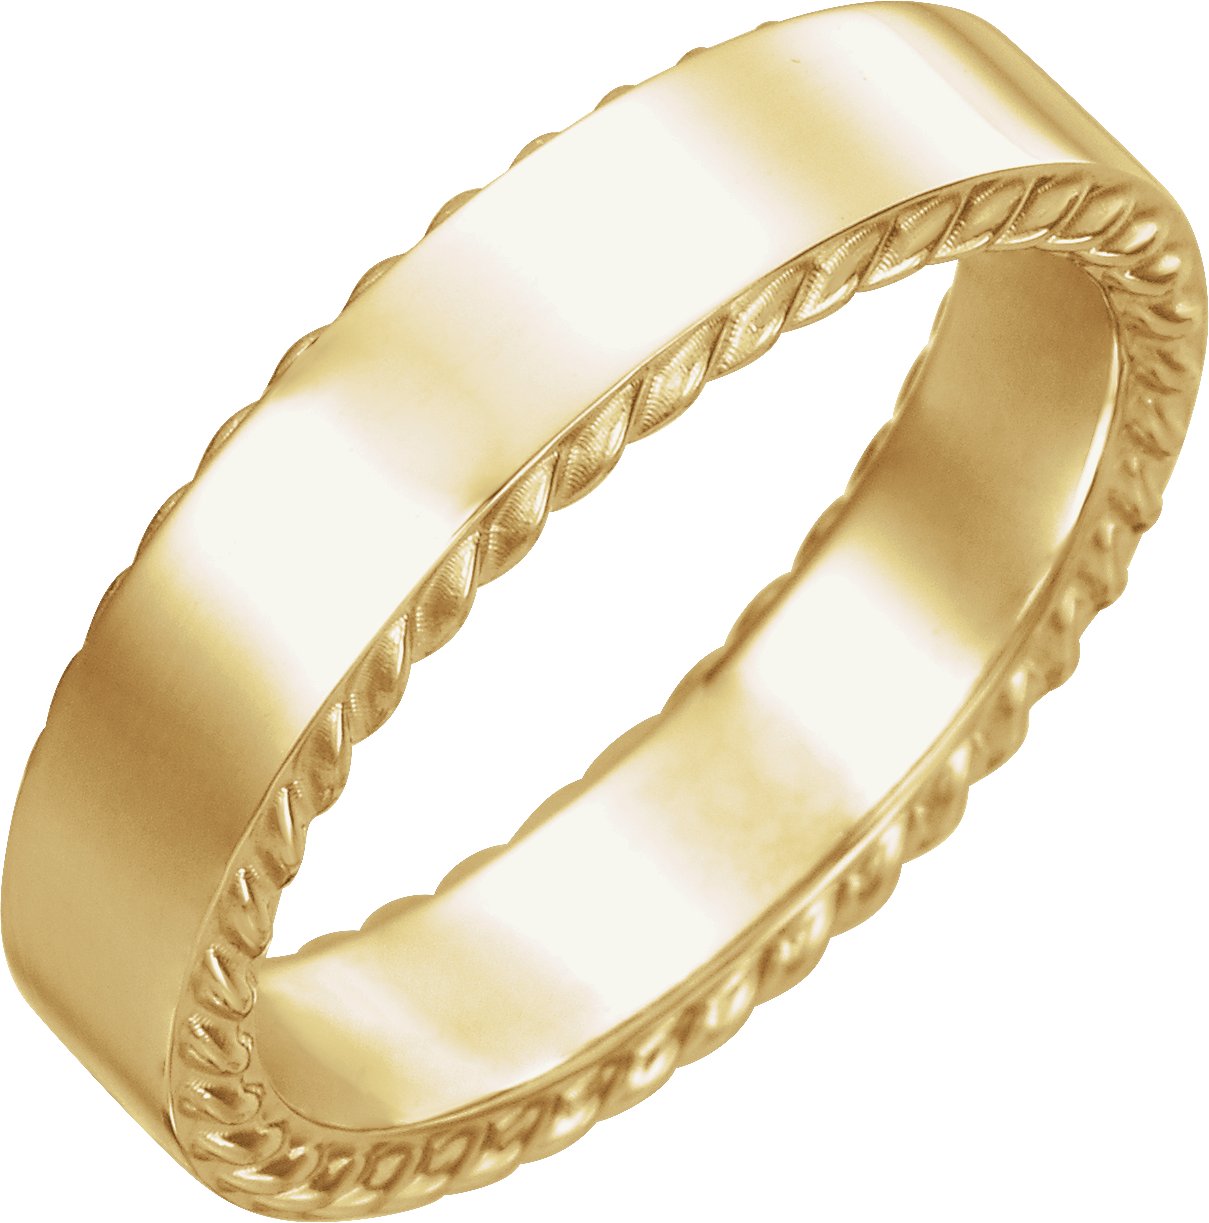 10K Yellow 5 mm Rope Pattern Band Size 12 Ref 16539187